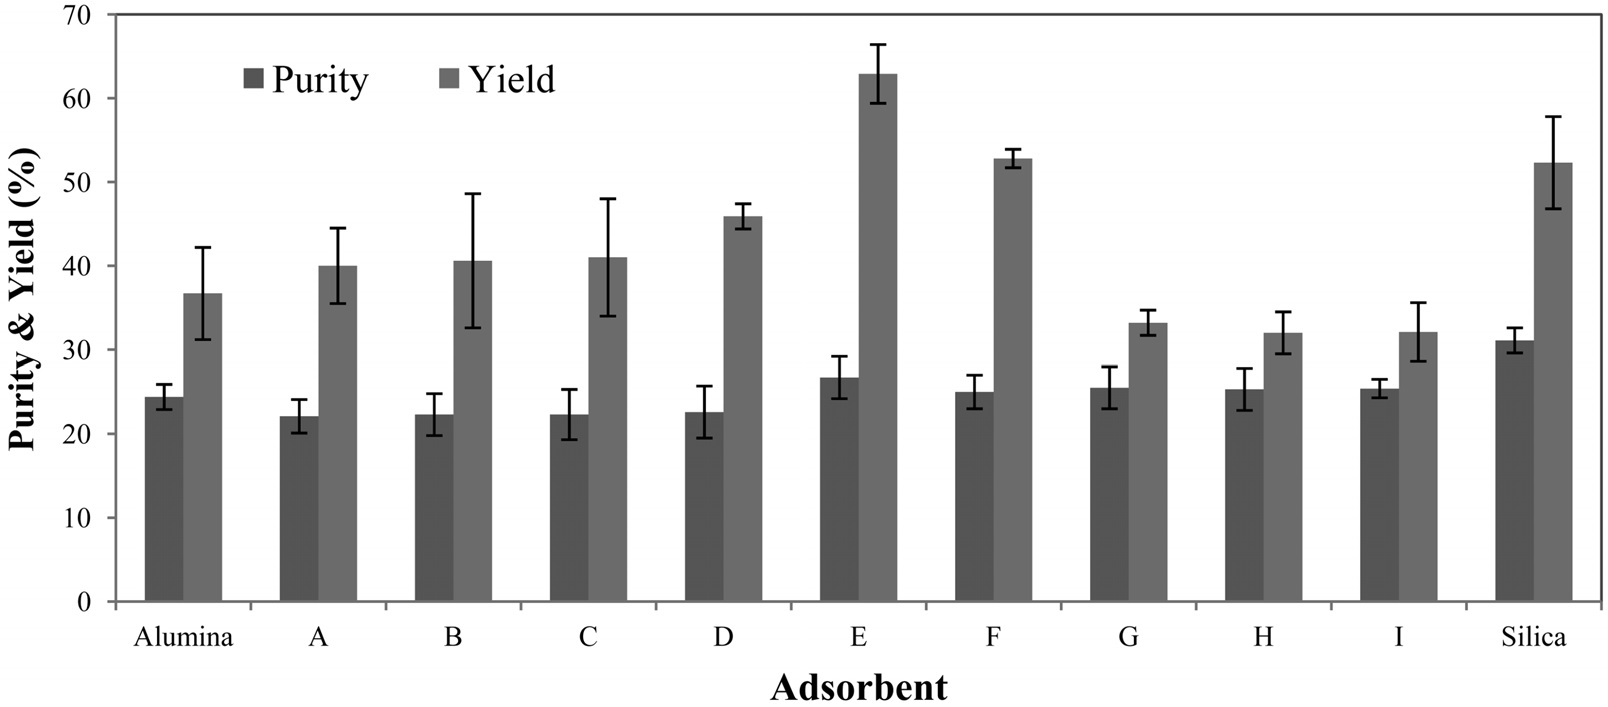 Effect of adsorbent on the purity and yield of paclitaxel in hexane precipitation. (A) S0.1A0.9, (B) S0.2A0.8, (C) S0.3A0.7, (D) S0.4A0.6, (E) S0.5A0.5, (F) S0.6A0.4, (G) S0.7A0.3, (H) S0.8A0.2, (I) S0.9A0.1.